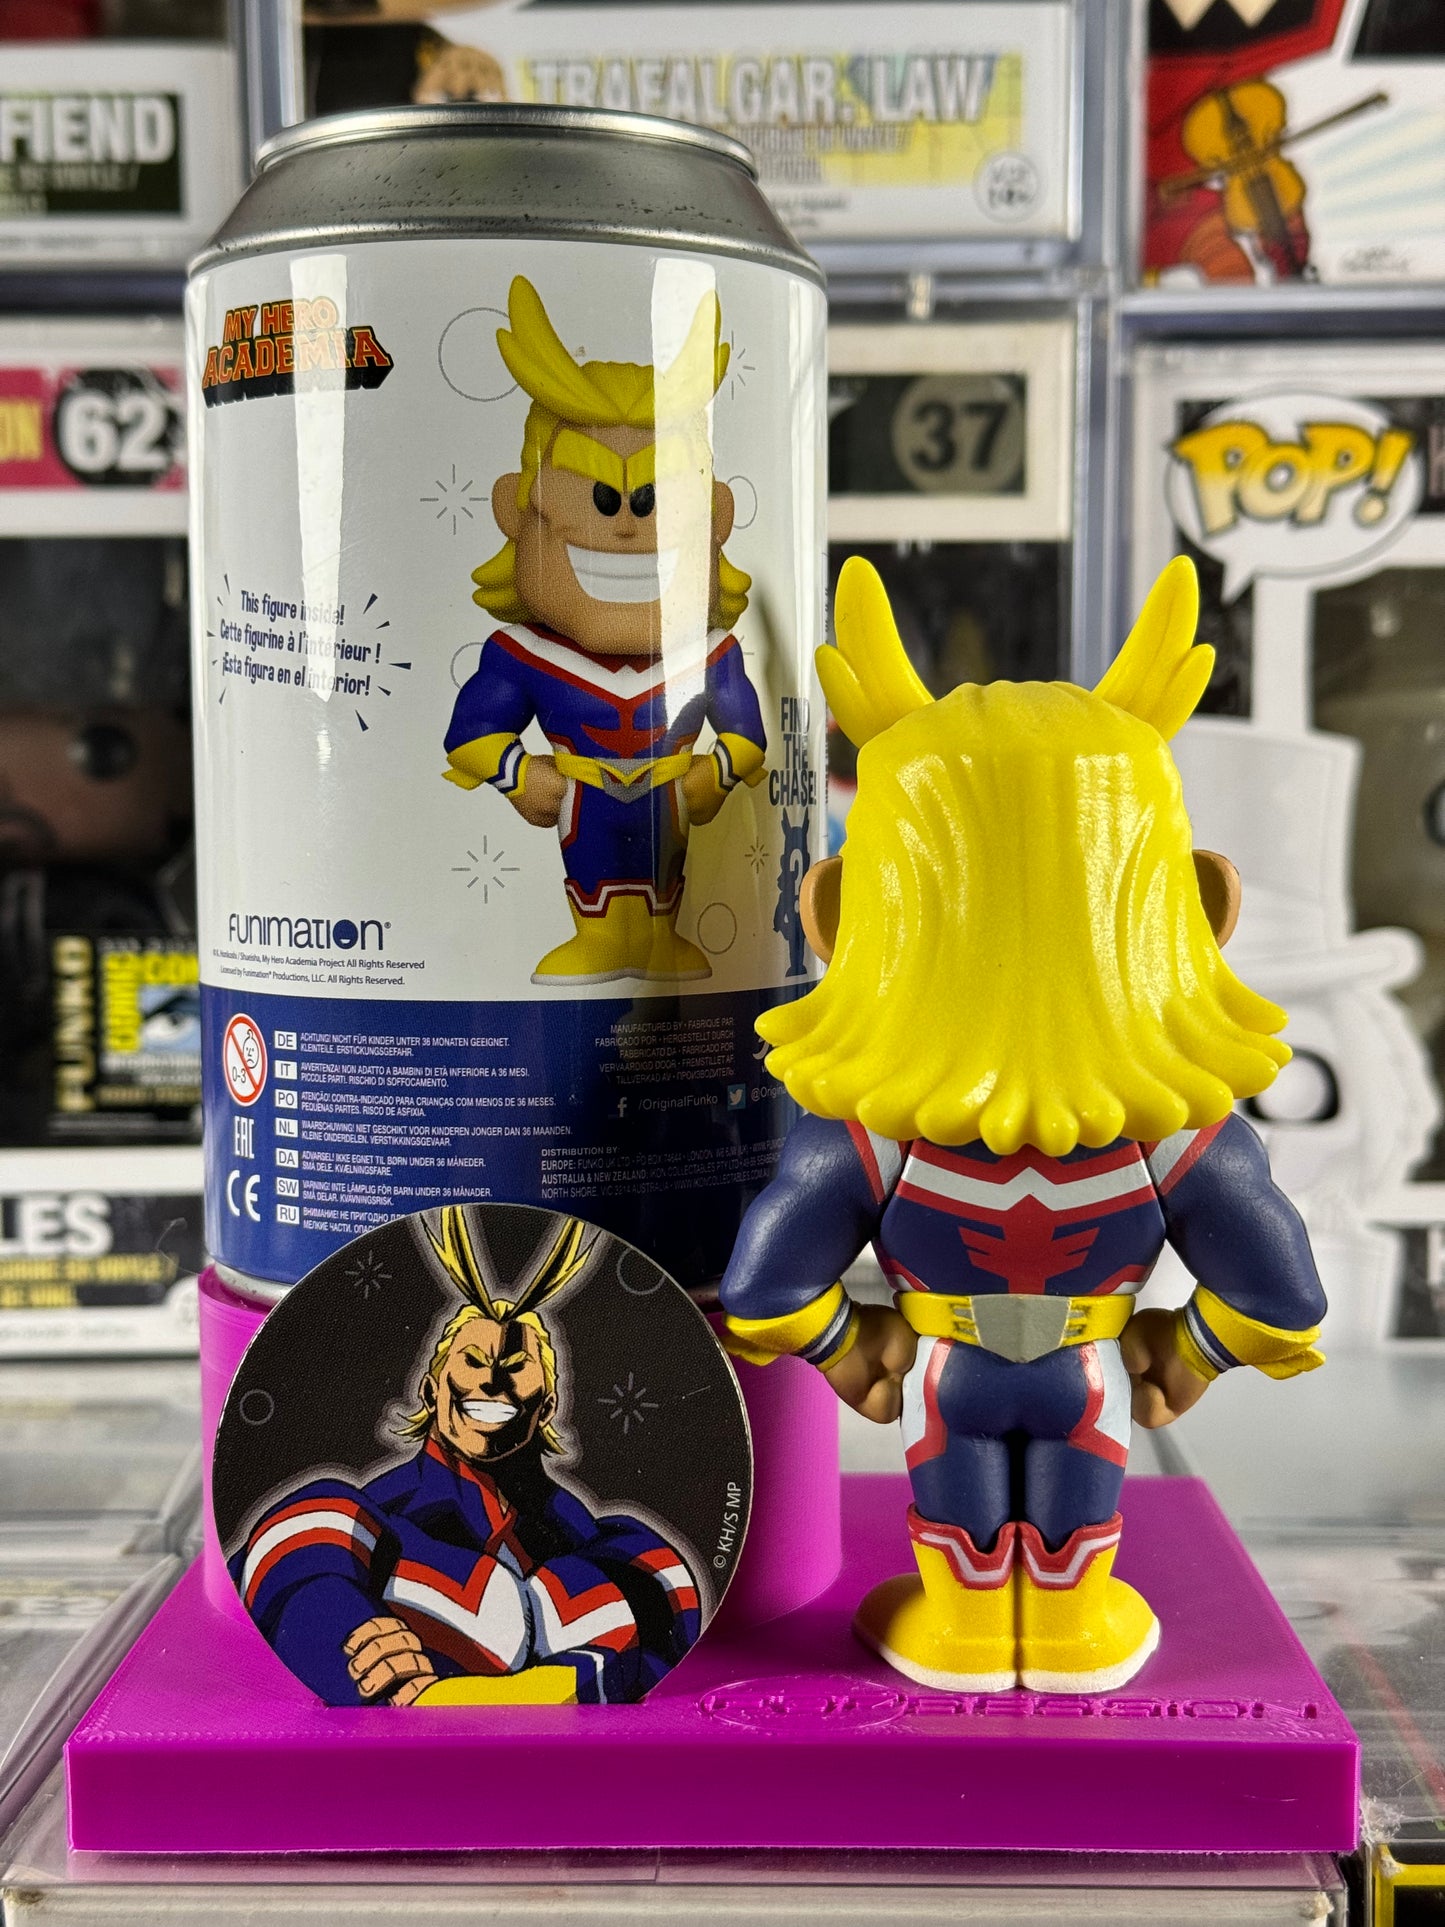 SODA Pop! - My Hero Academia - All Might GLOWING CHASE